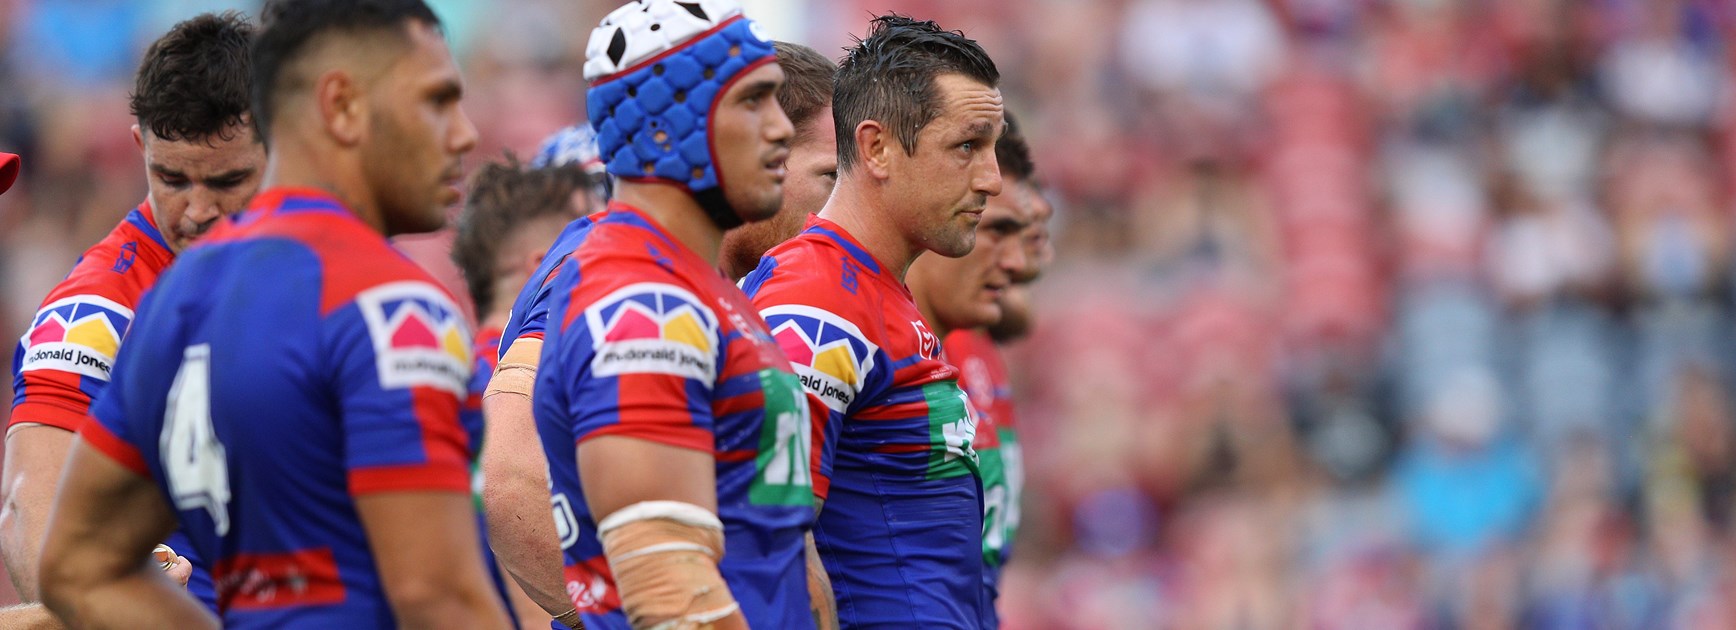 Newcastle Knights players after conceding a try.